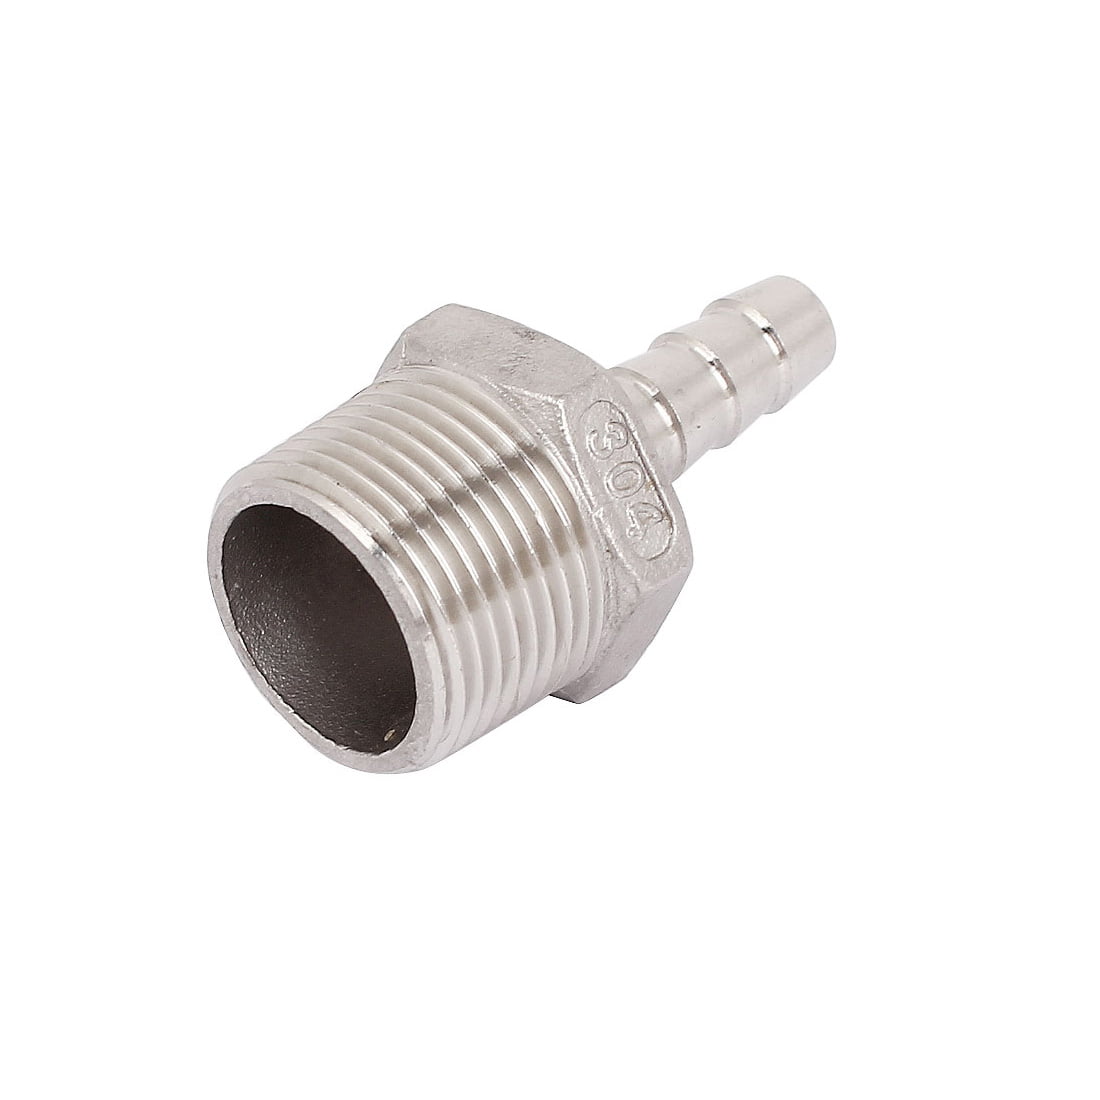 3/4BSP Male Thread to 10mm Hose Barb Straight Quick Fitting Adapter Coupler